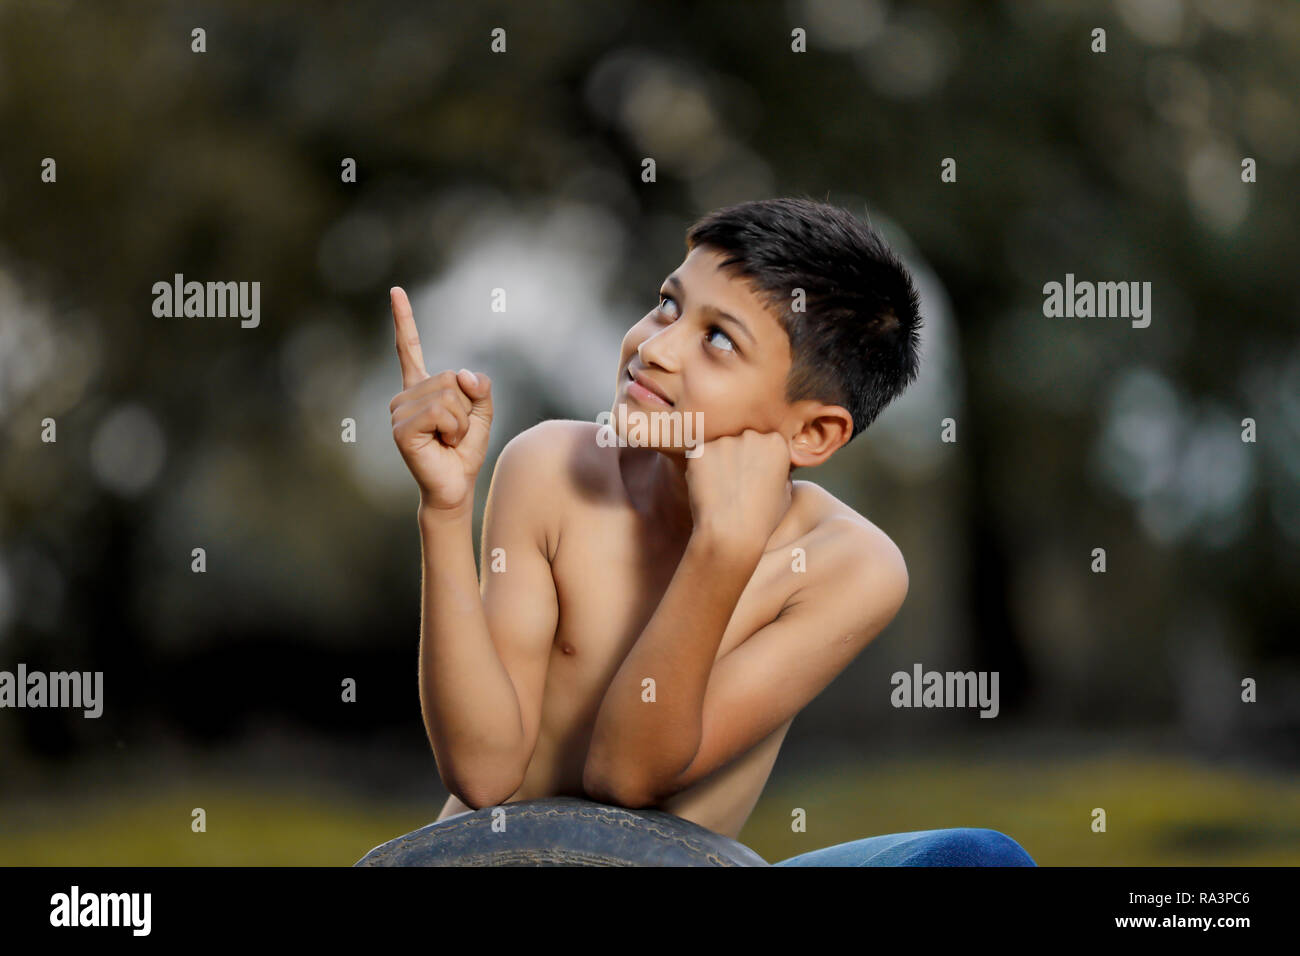 Rural indian child Stock Photo